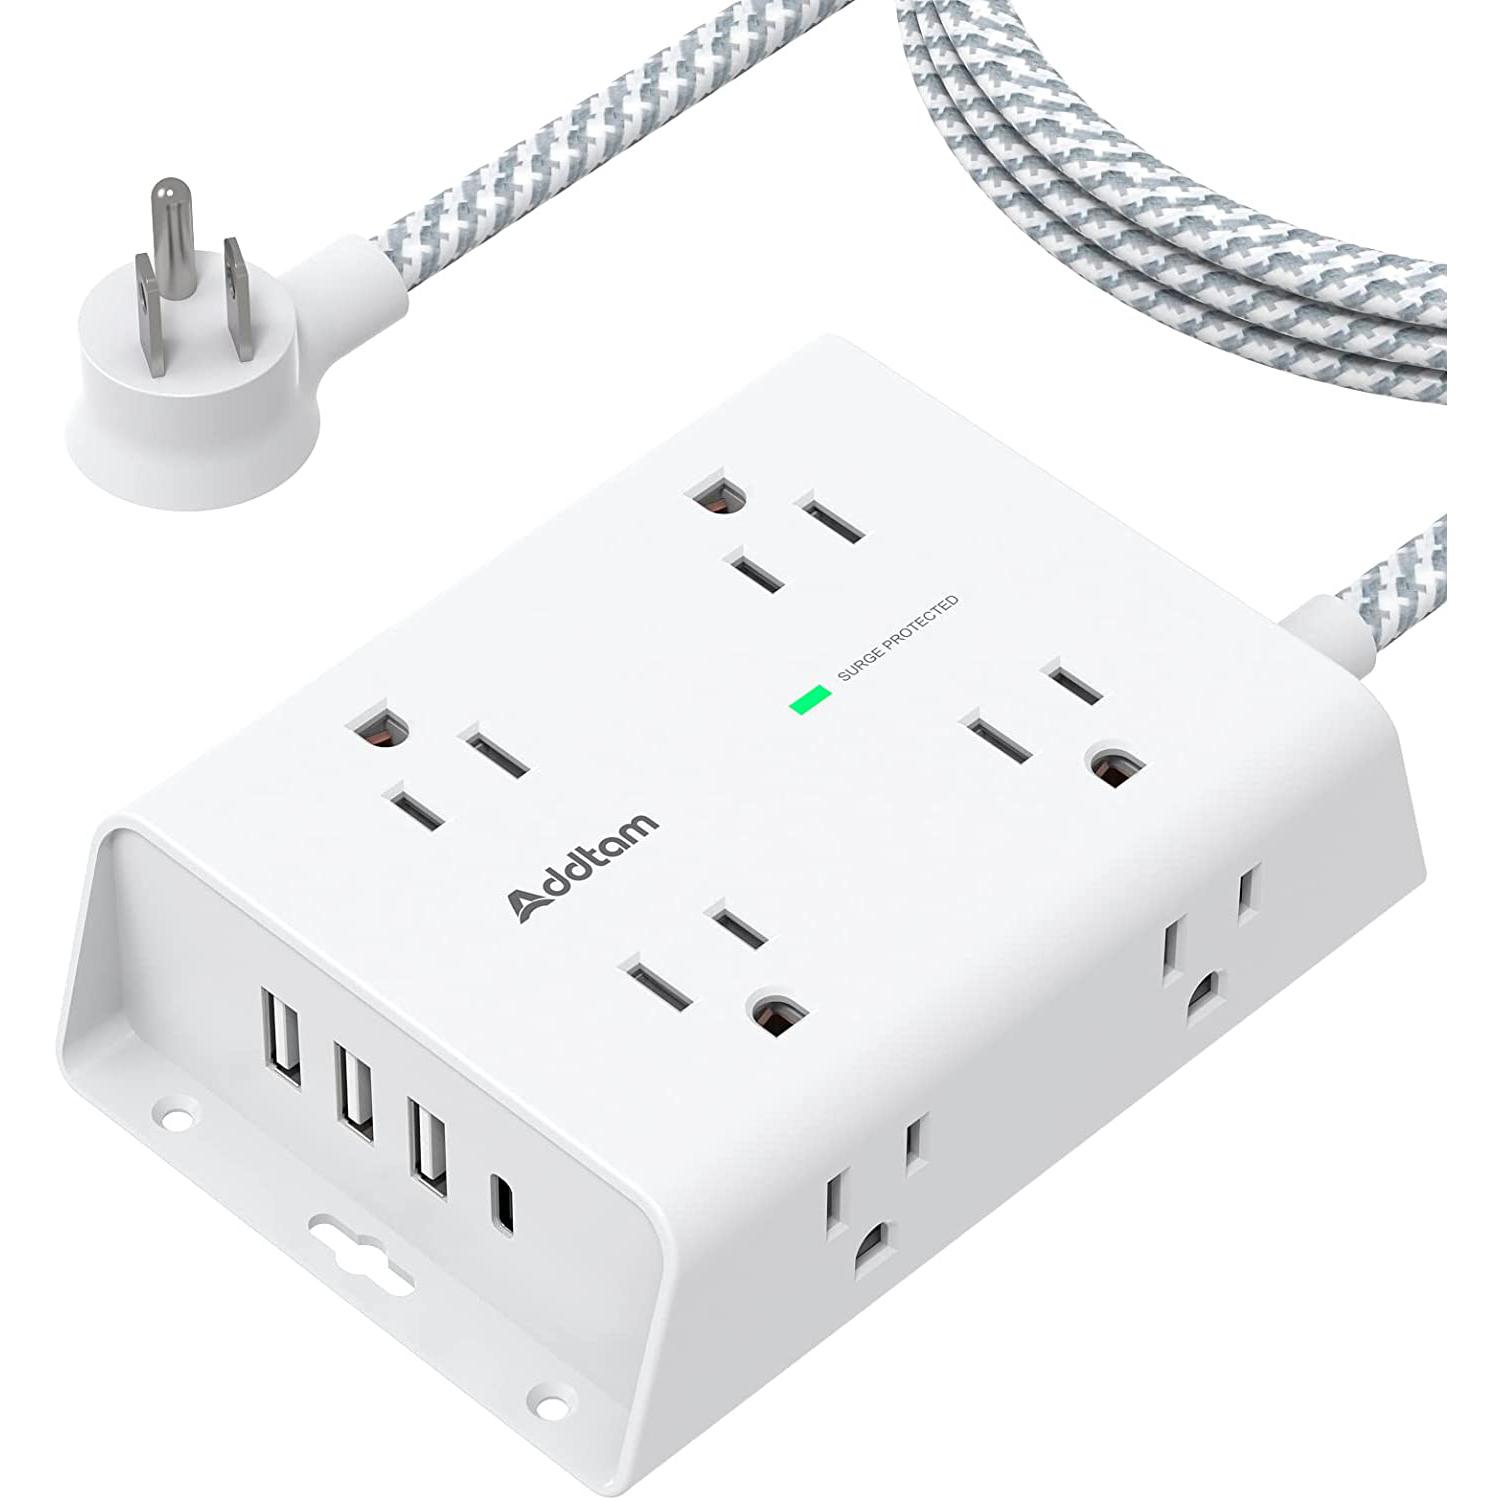 Surge Protector Power Strip with 8 Outlet with 4 USB Ports for $14.99